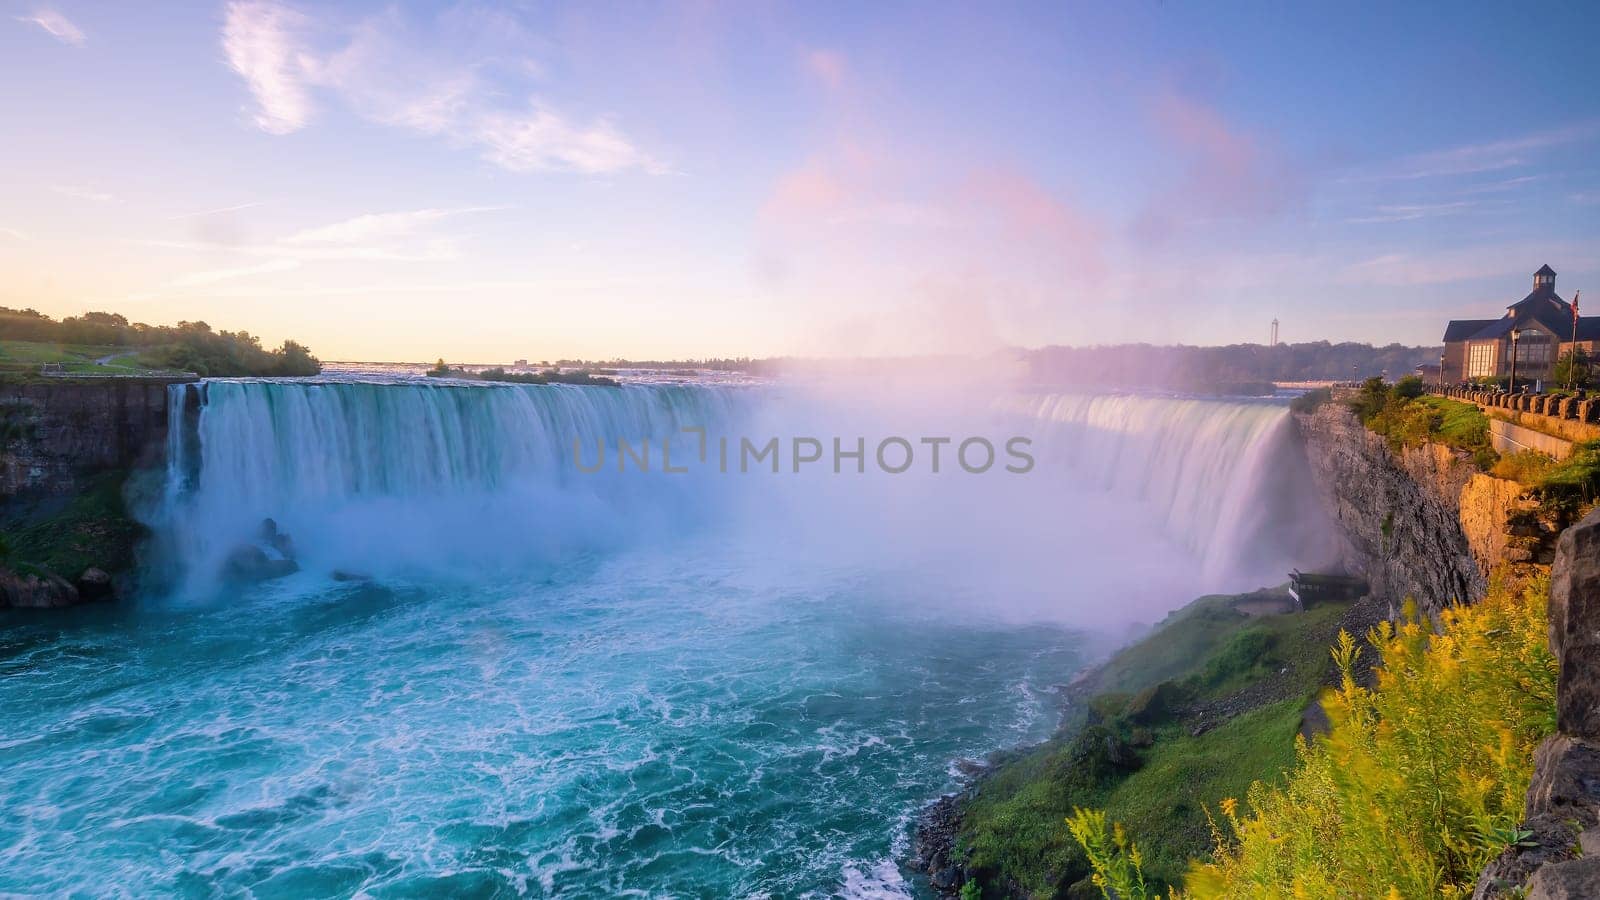 Niagara falls between Canada and United States of America  by f11photo